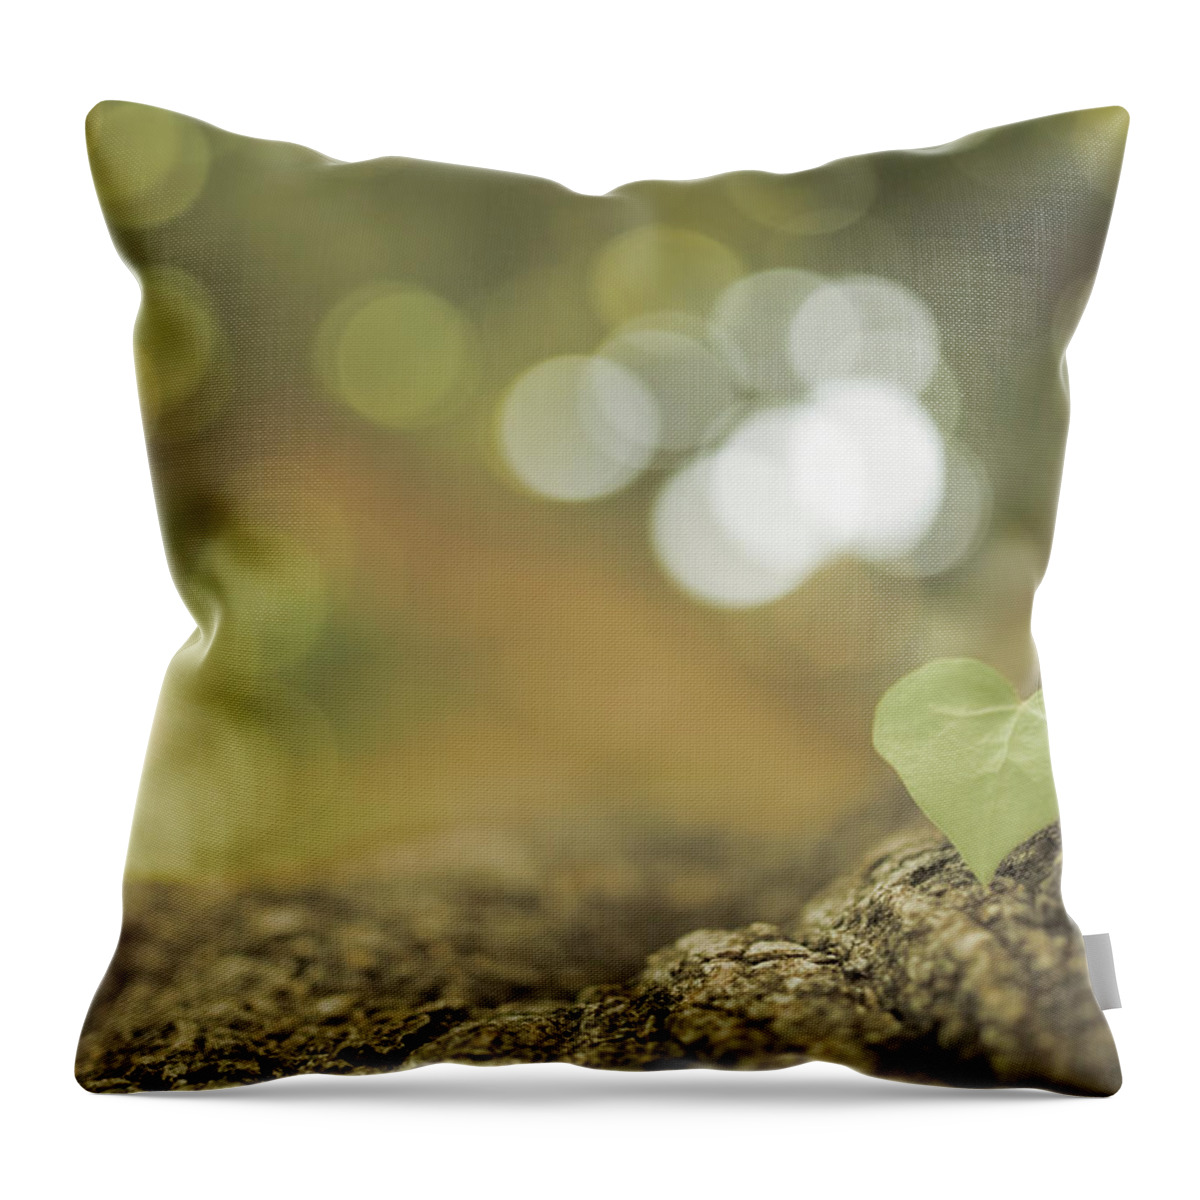 Outdoors Throw Pillow featuring the photograph Green Clover Upon Bark Of Tree by G.g.bruno